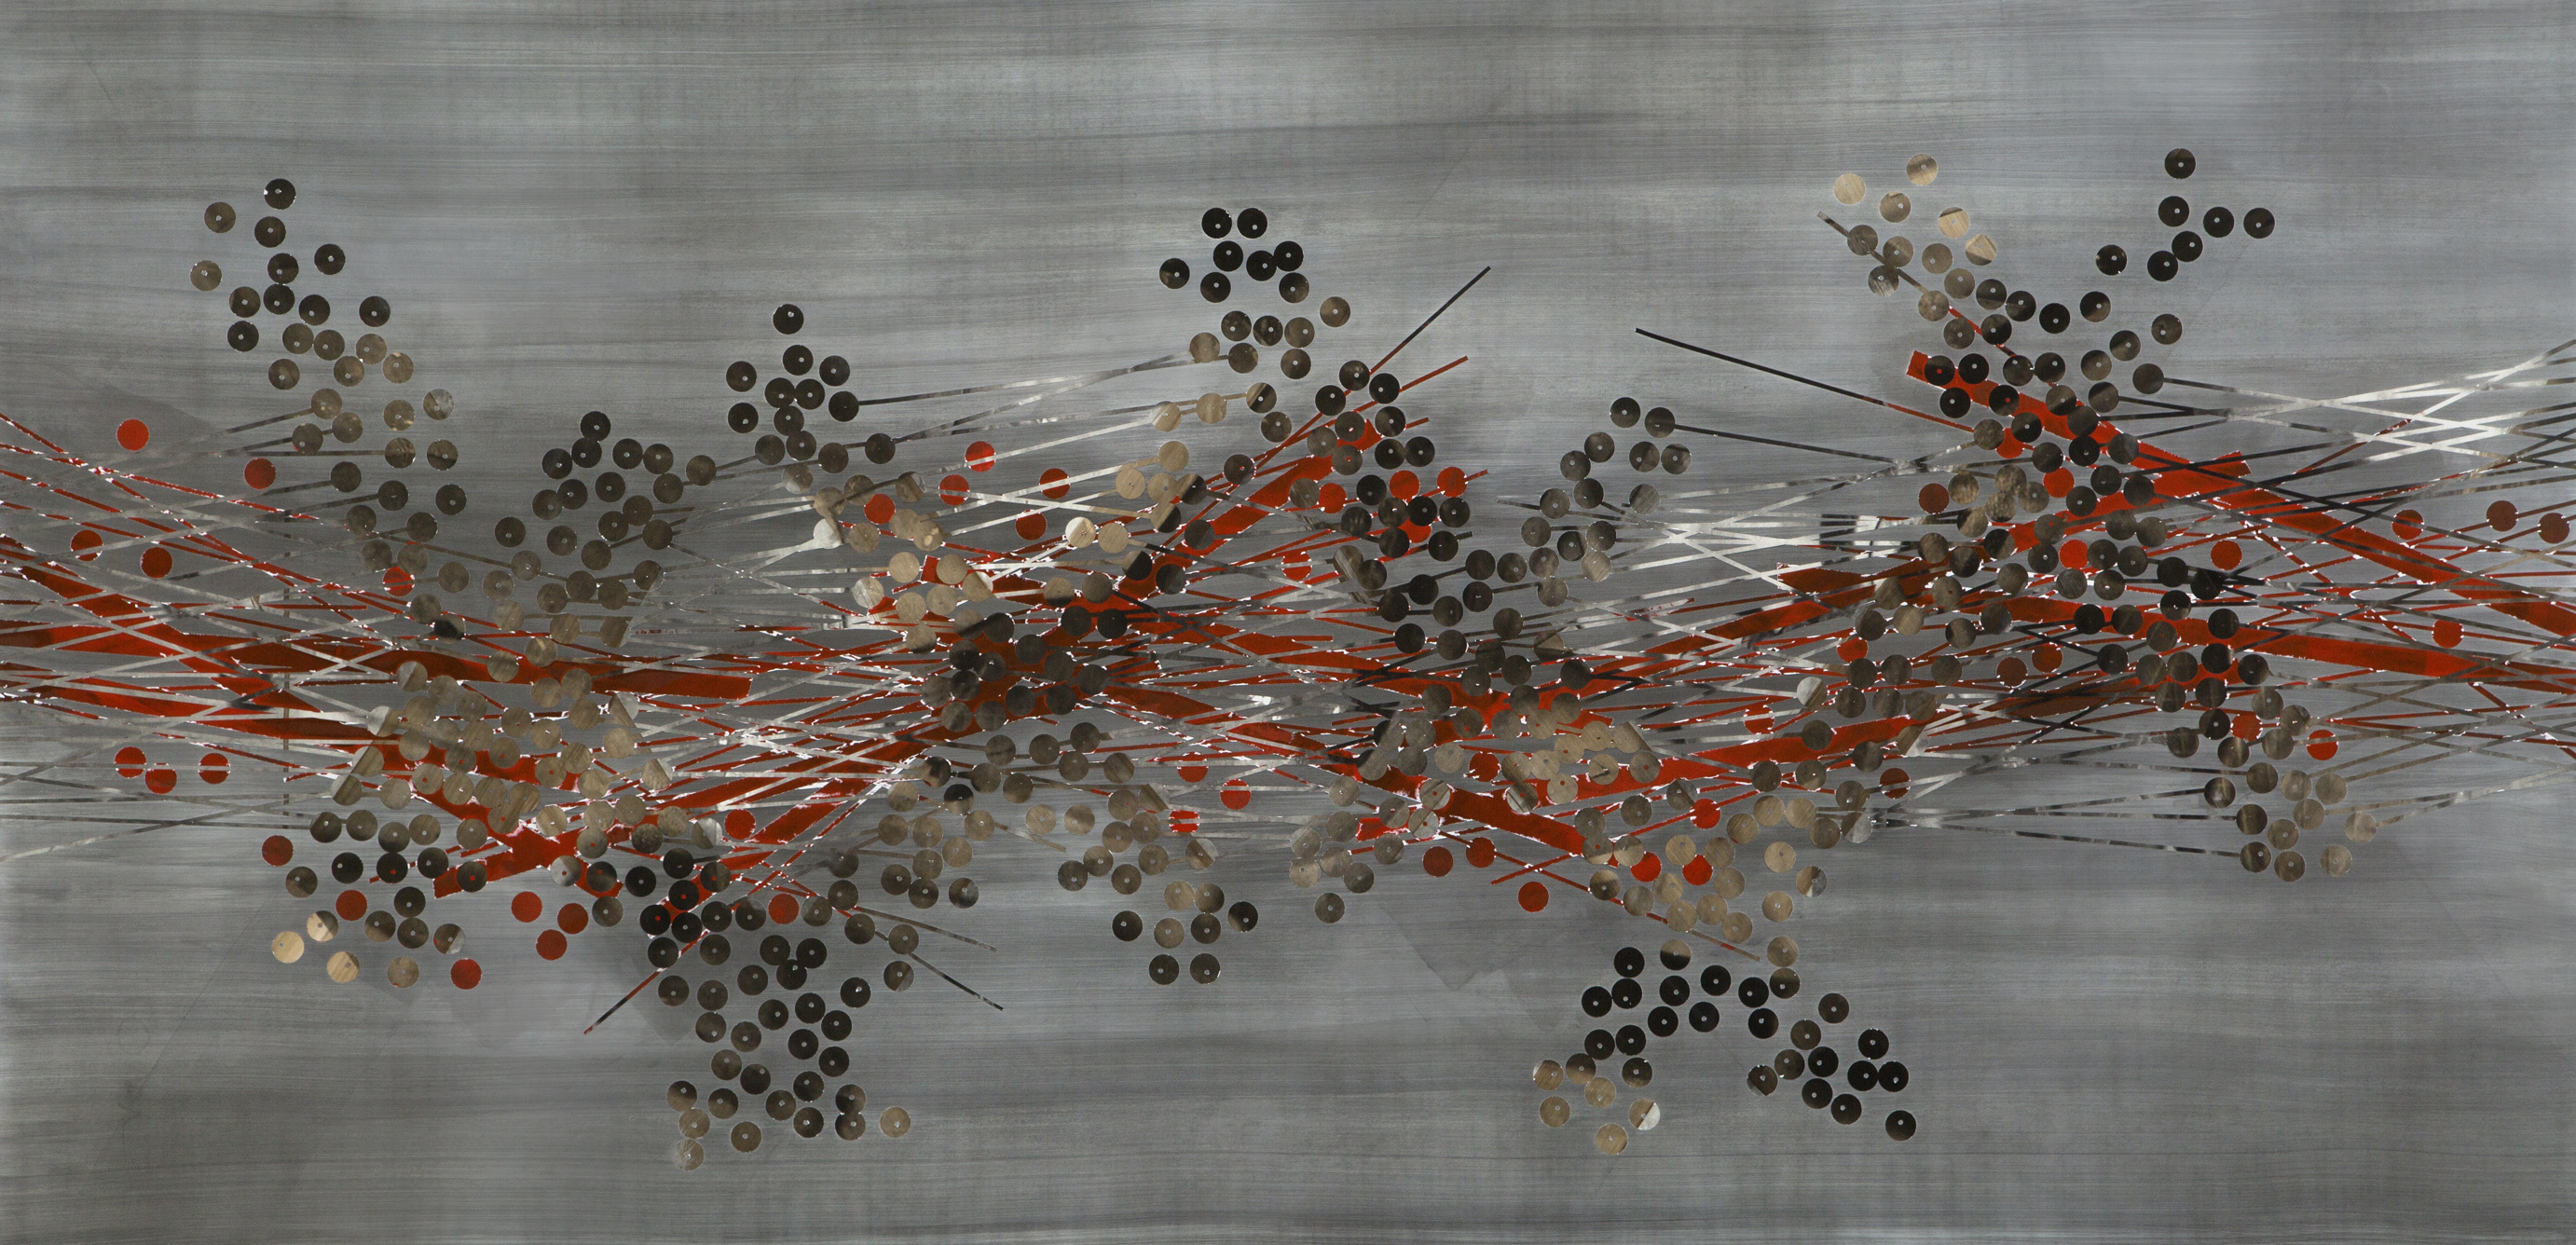 TRIBE 189 - 2013, acrylic, watercolor, graphite on paper, 35.25 x 71.75 inches (AVAILABLE)